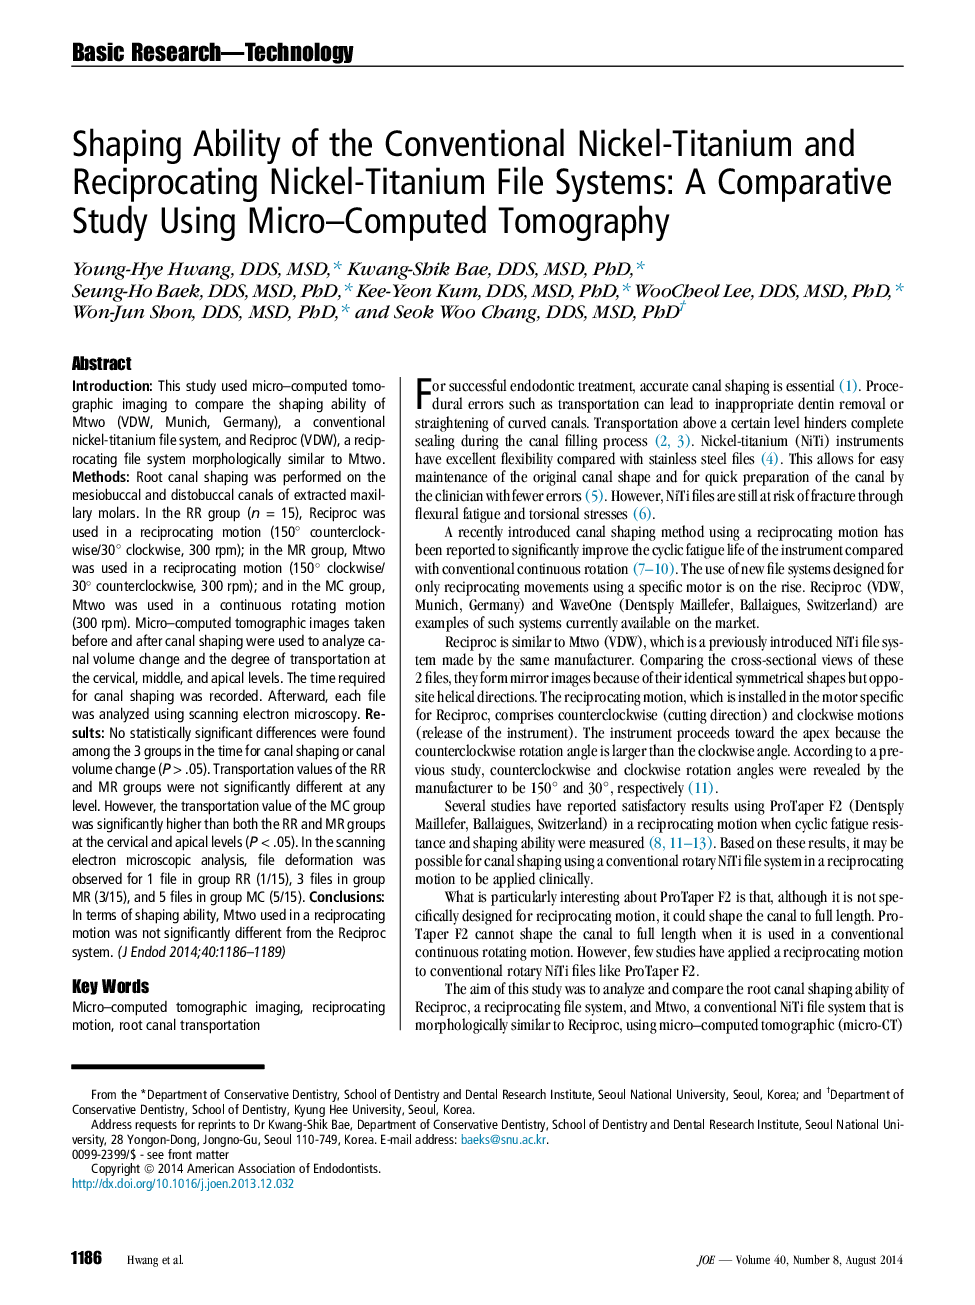 Shaping Ability of the Conventional Nickel-Titanium and Reciprocating Nickel-Titanium File Systems: A Comparative Study Using Micro–Computed Tomography 